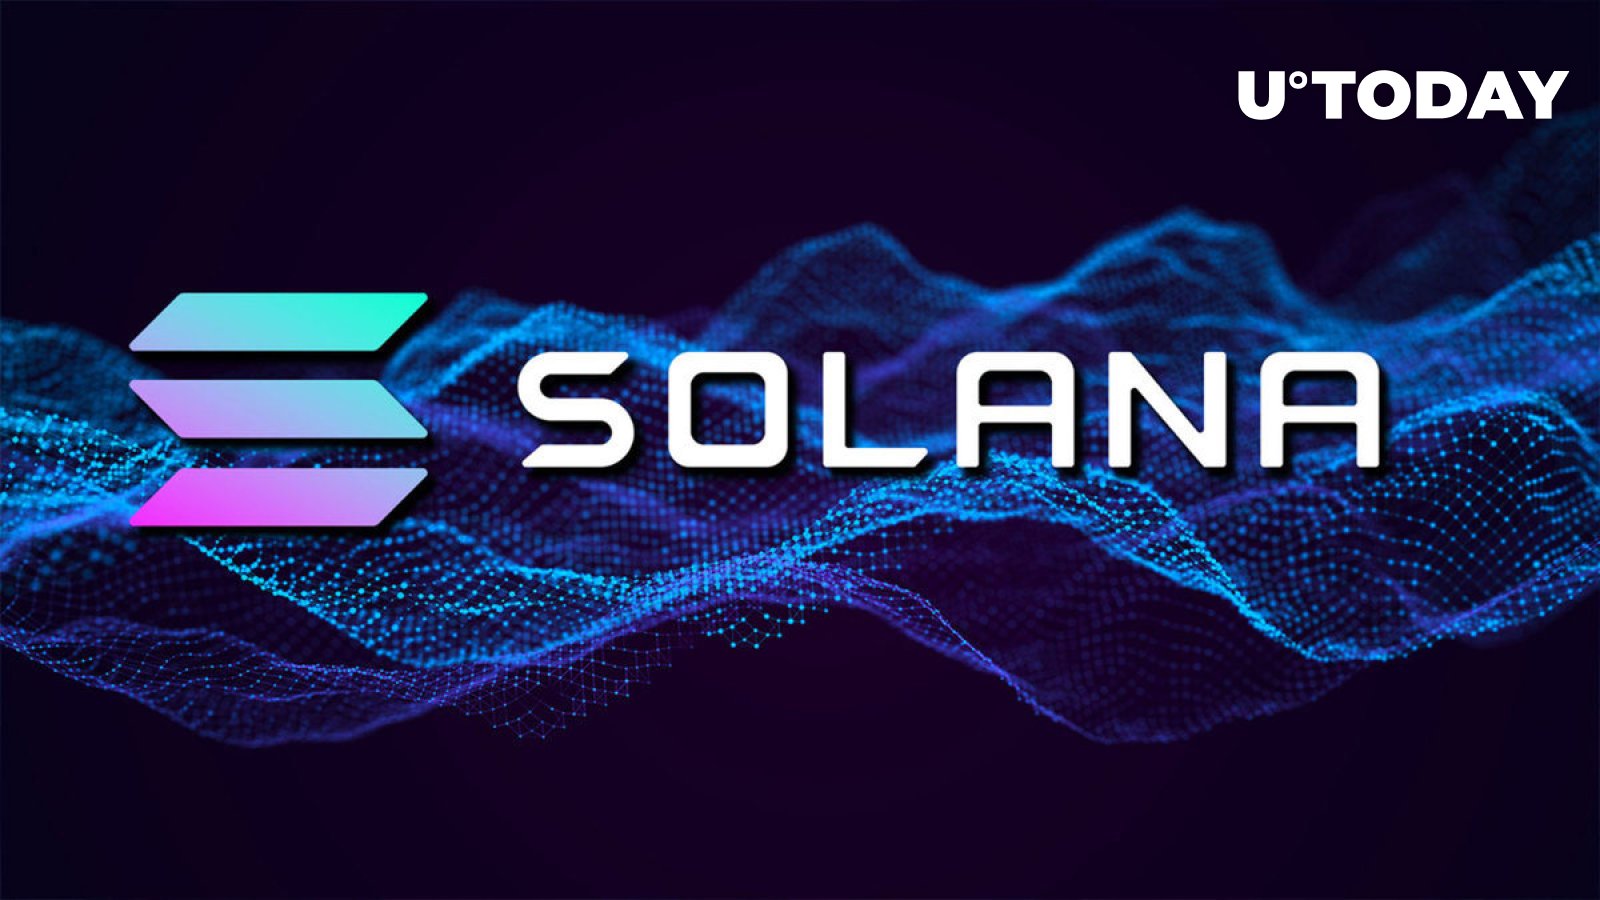 Solana (SOL) Supported by Top Analyst Despite Meltdown; Why?